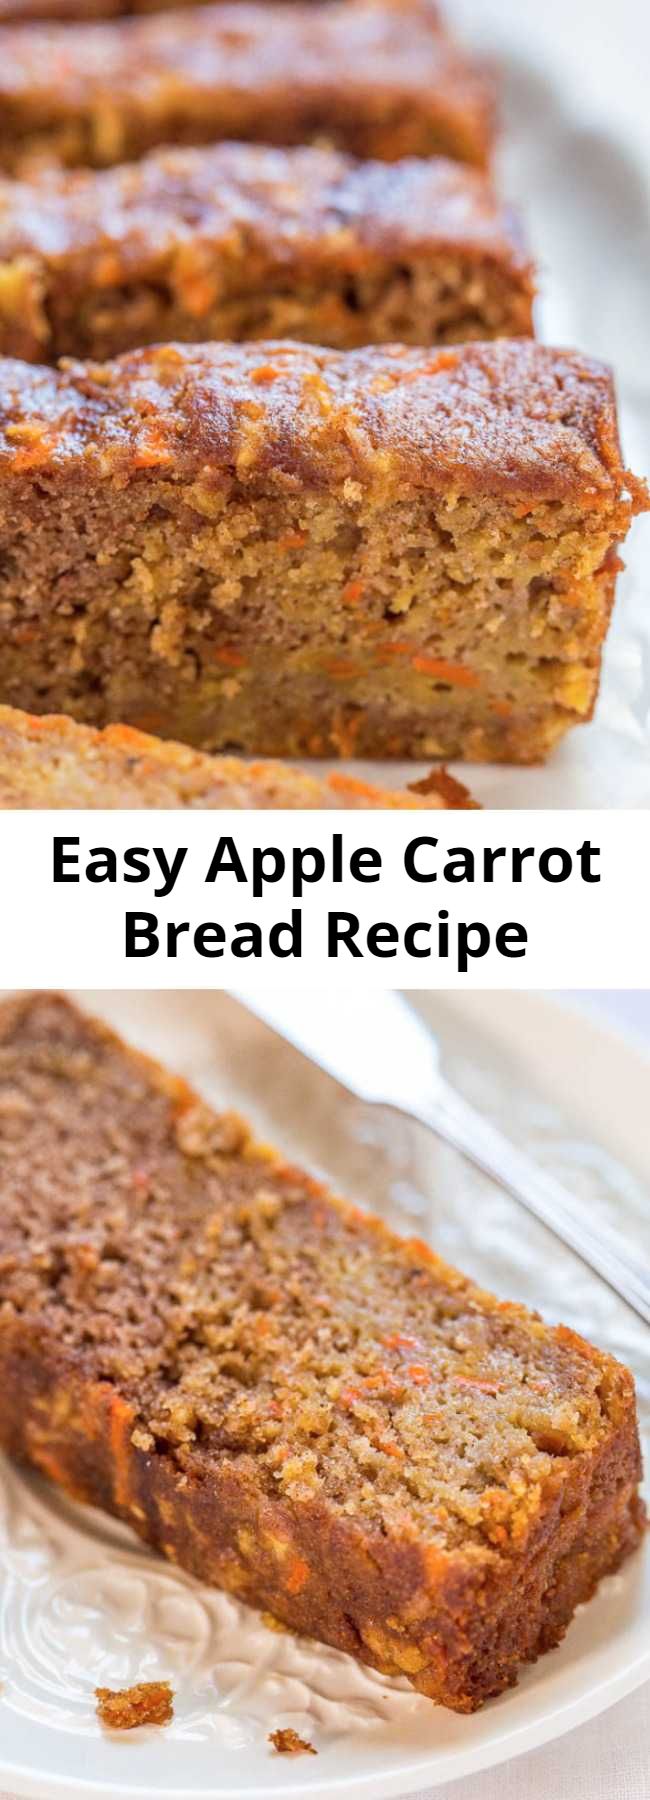 Easy Apple Carrot Bread Recipe - This apple carrot bread tastes like carrot cake that’s been infused with apples. It’s a no mixer recipe that goes from bowl to oven in minutes!